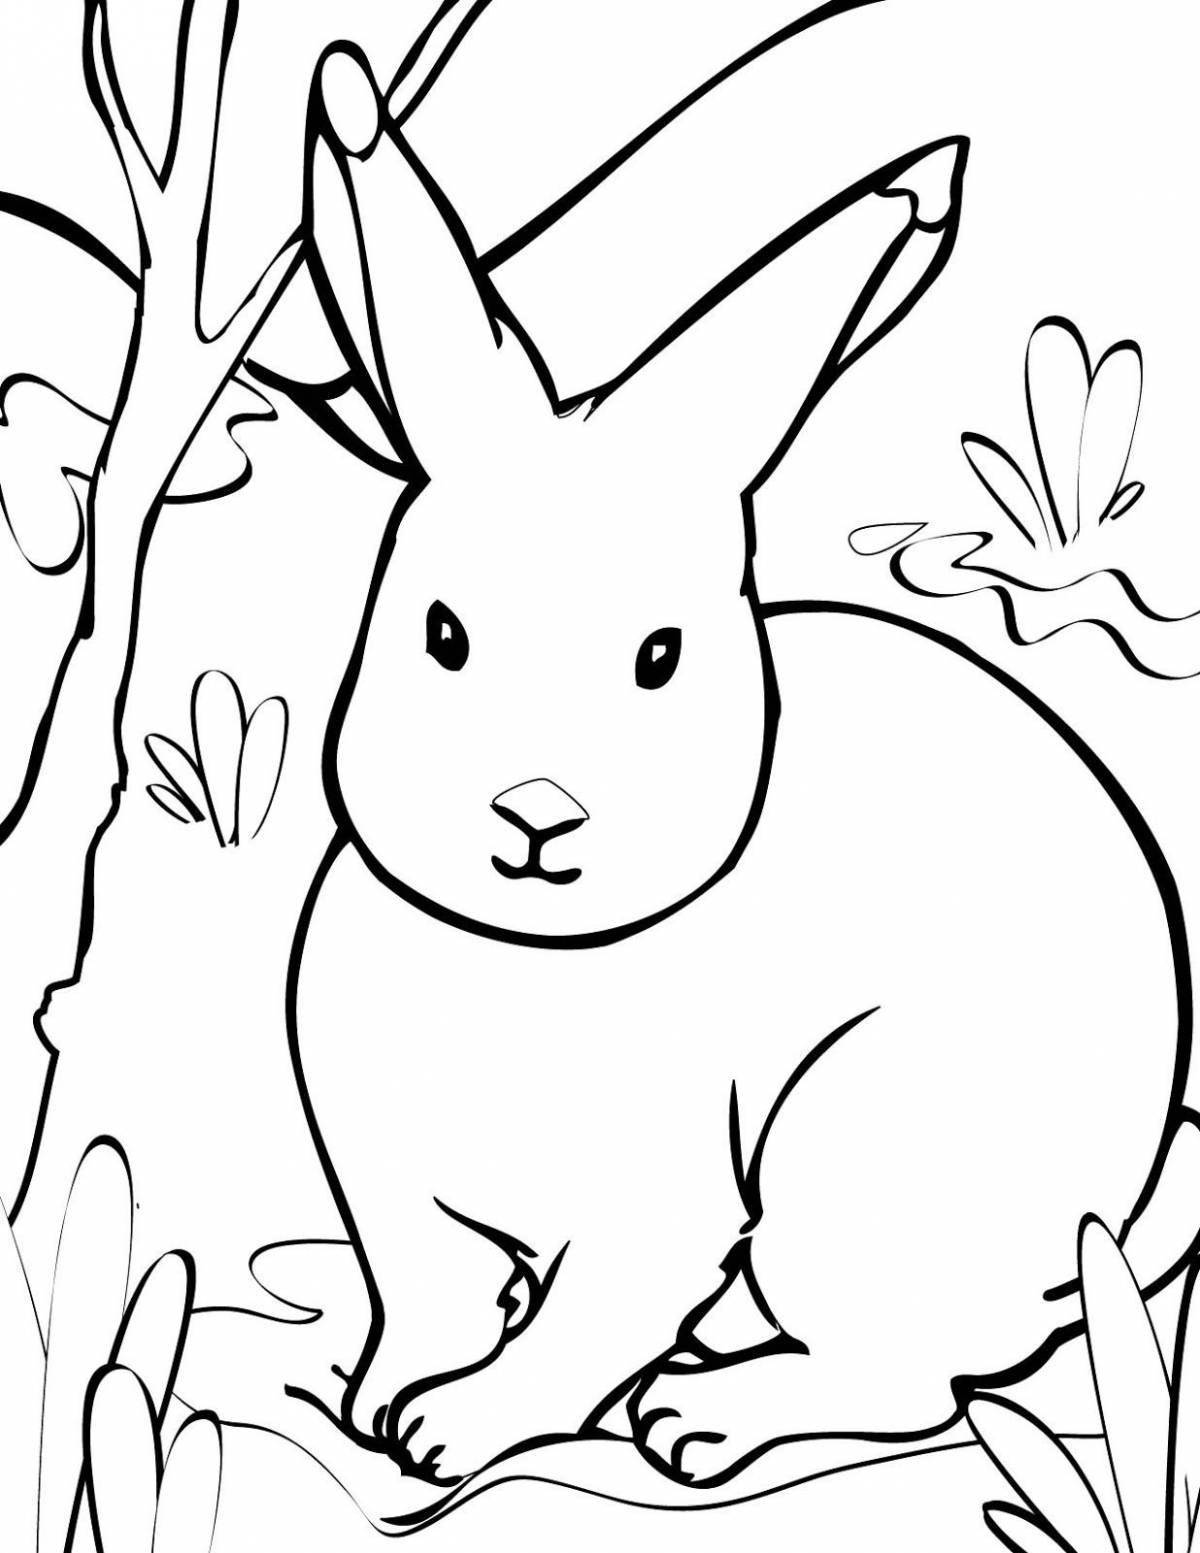 Glitter forest animals coloring pages for kids